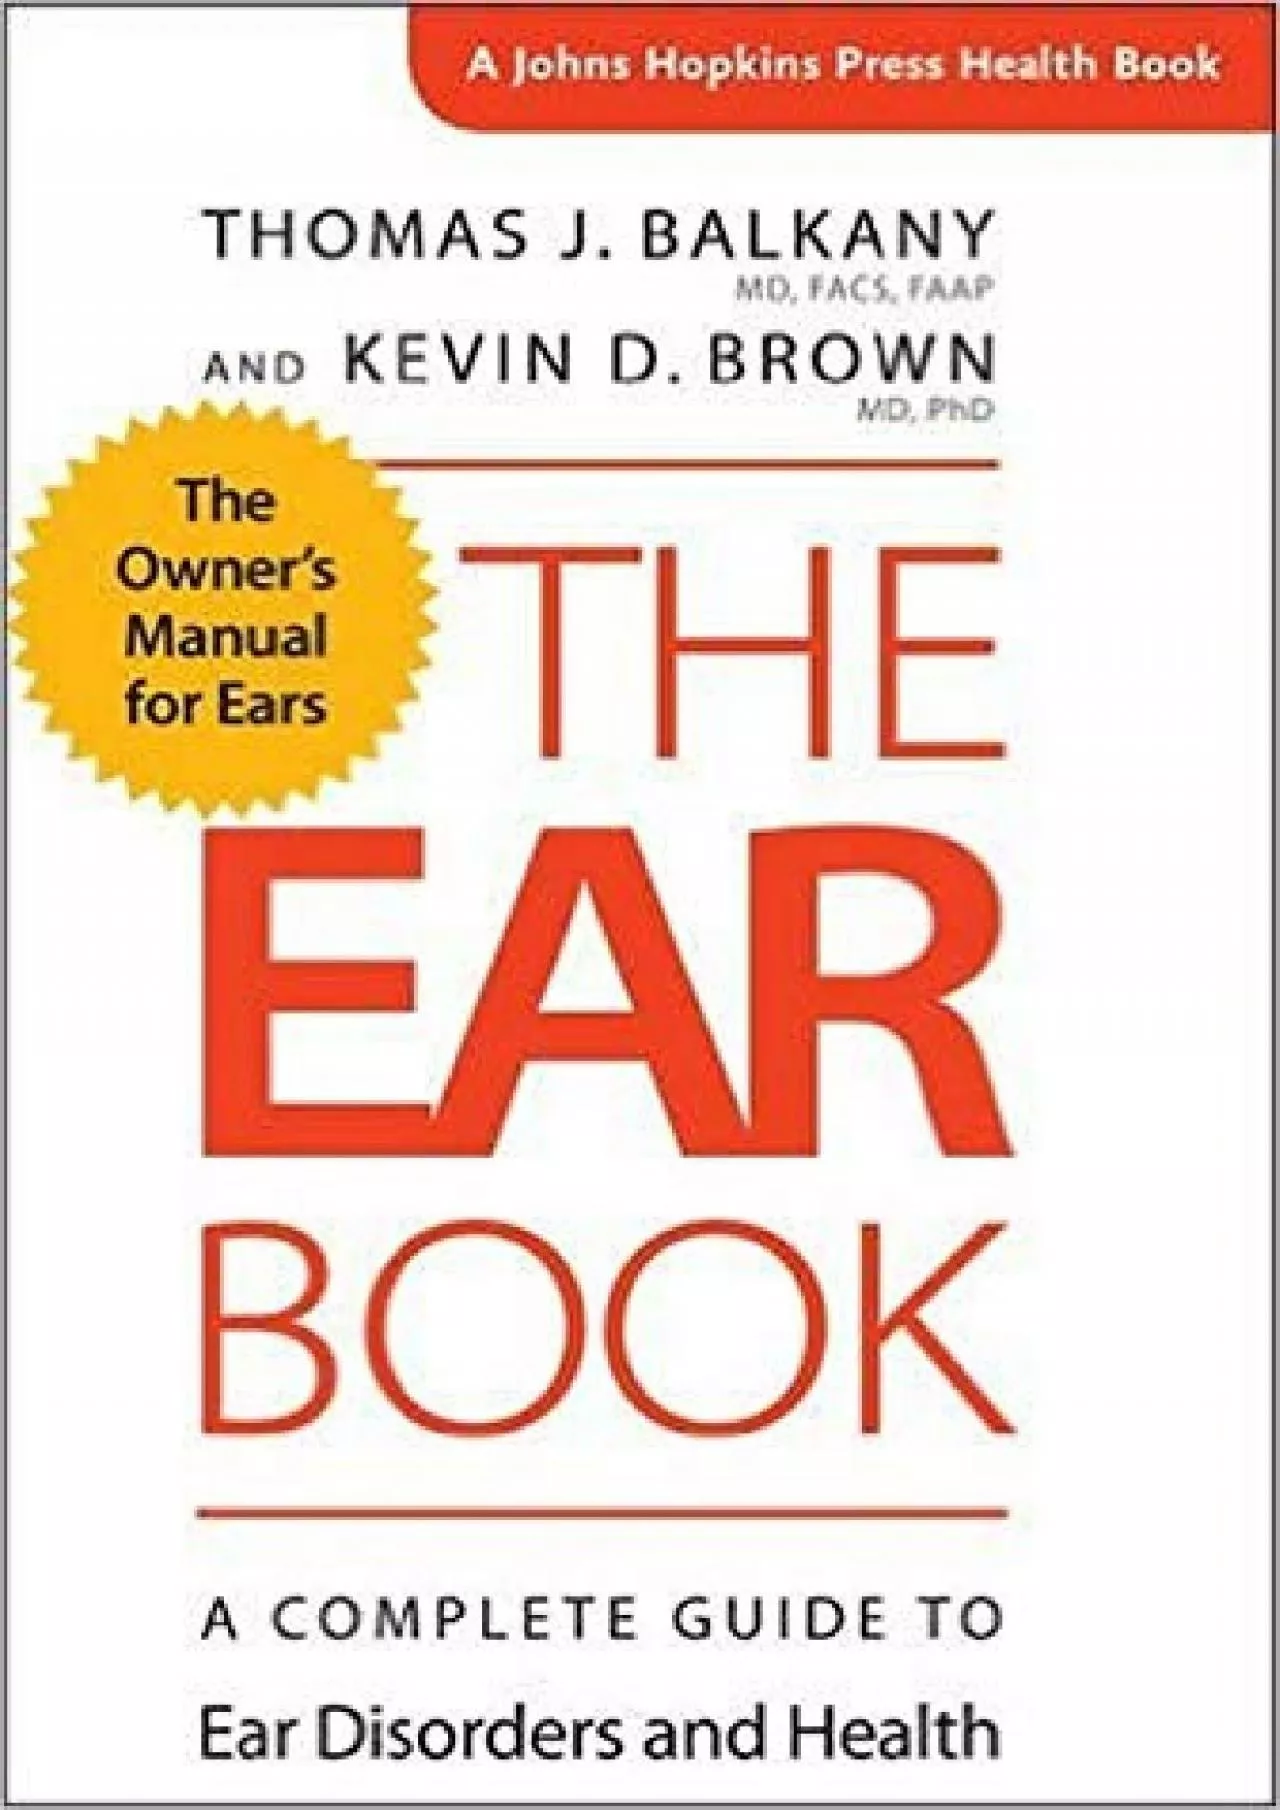 (READ)-The Ear Book: A Complete Guide to Ear Disorders and Health (A Johns Hopkins Press